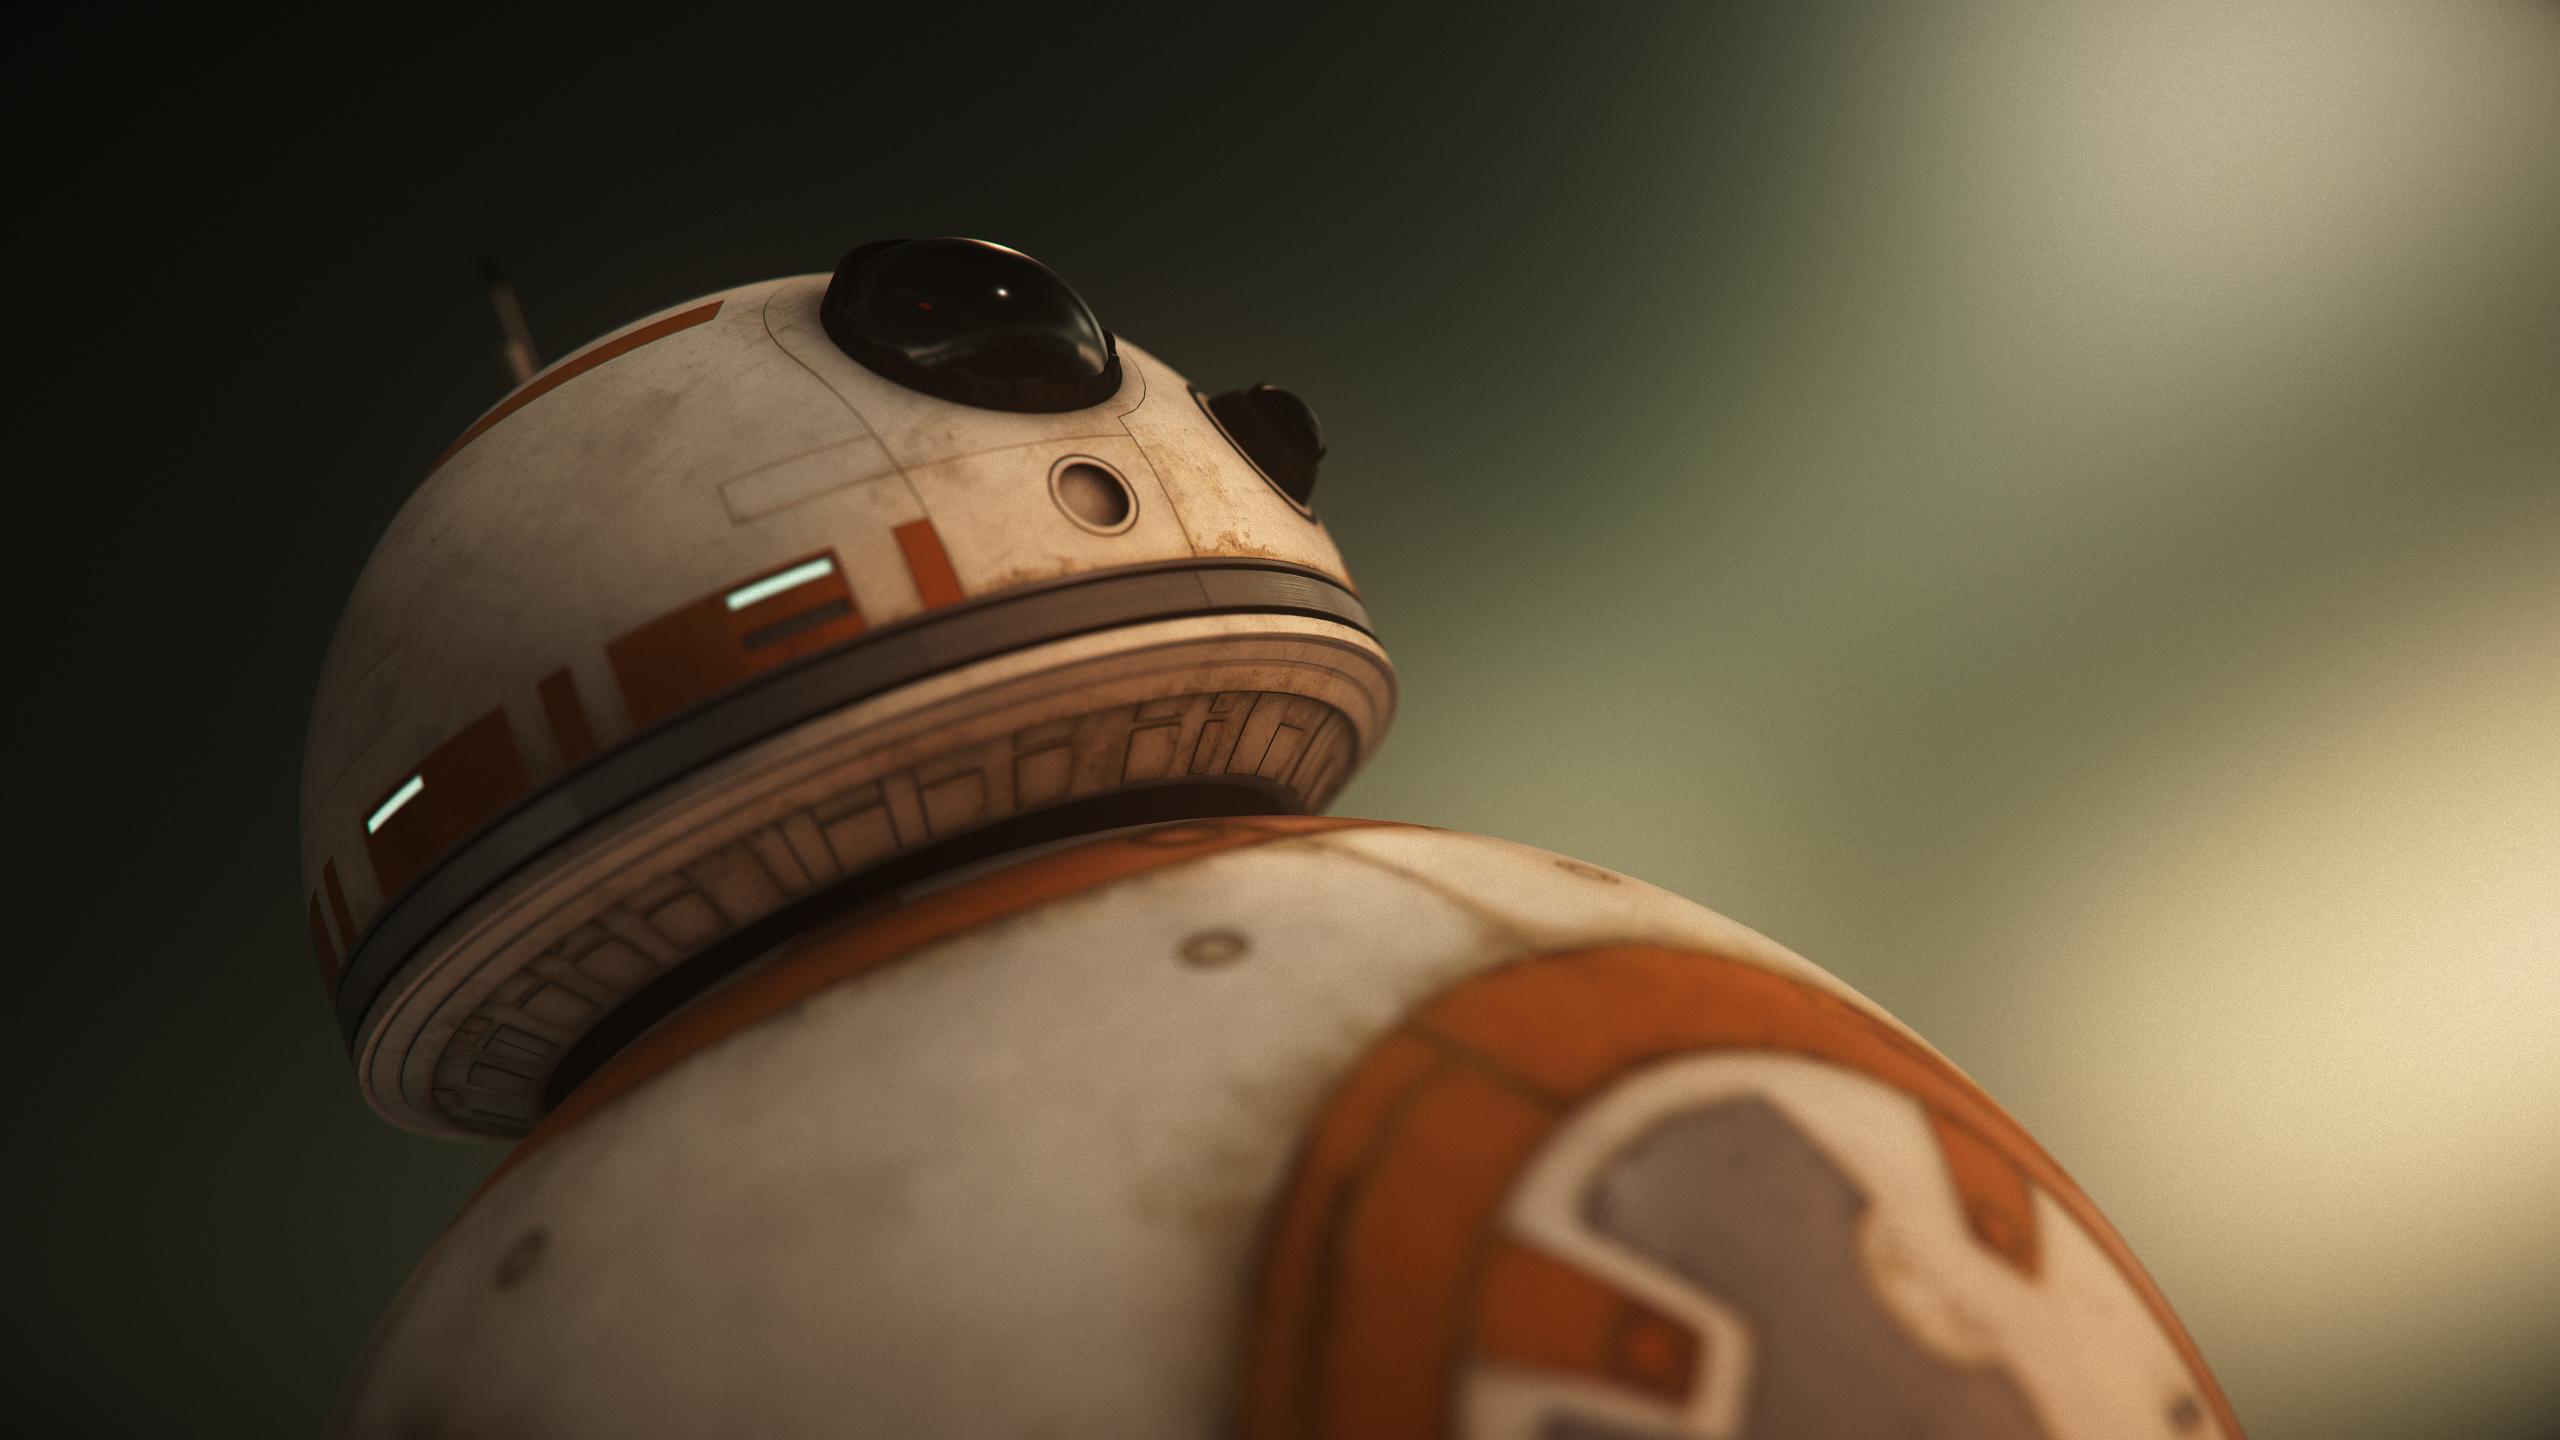 2560 x 1440 · jpeg - BB 8 Droid in Star Wars Wallpapers | Wallpapers HD